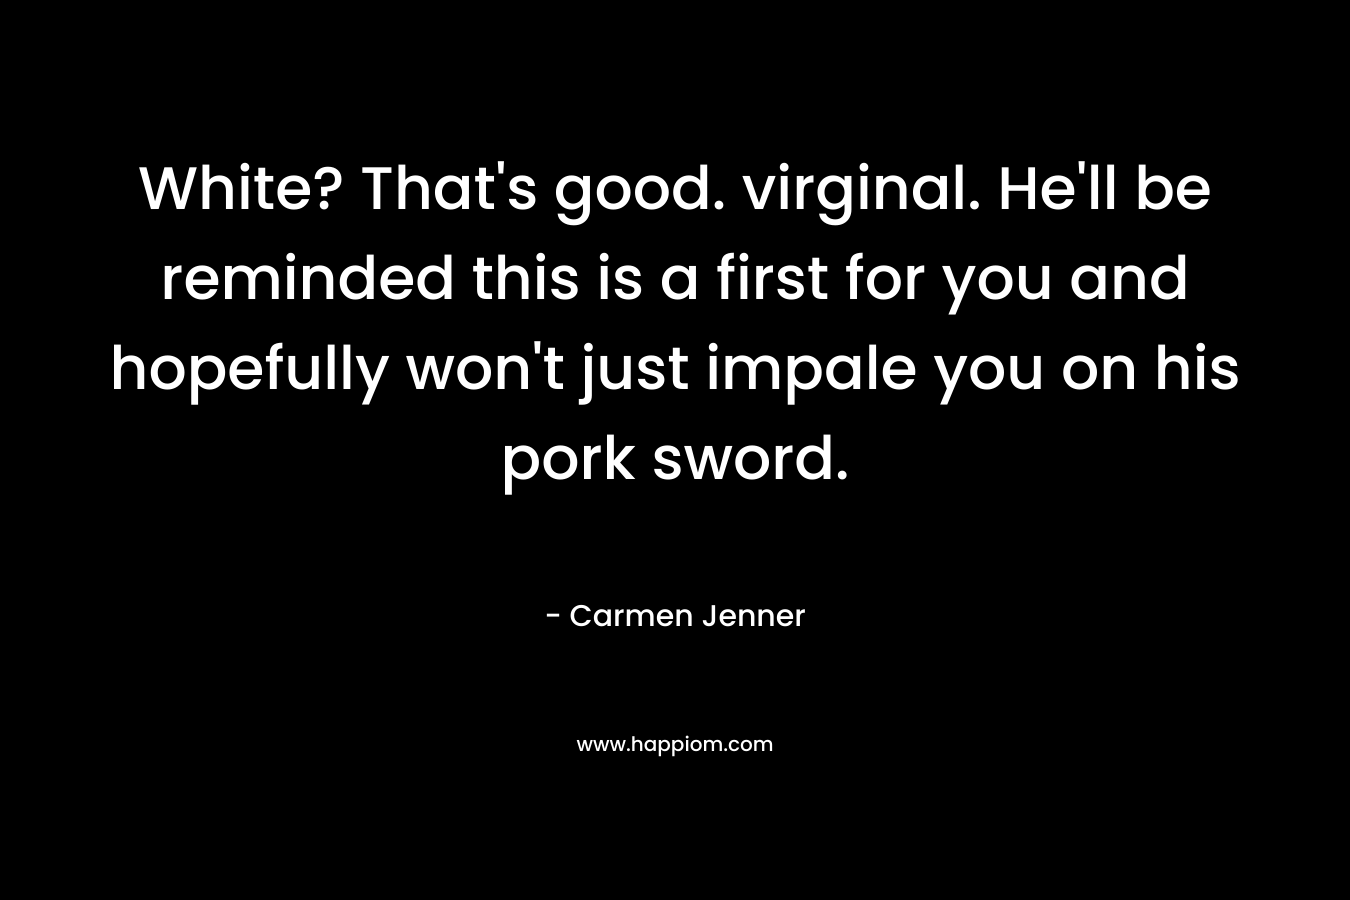 White? That's good. virginal. He'll be reminded this is a first for you and hopefully won't just impale you on his pork sword.